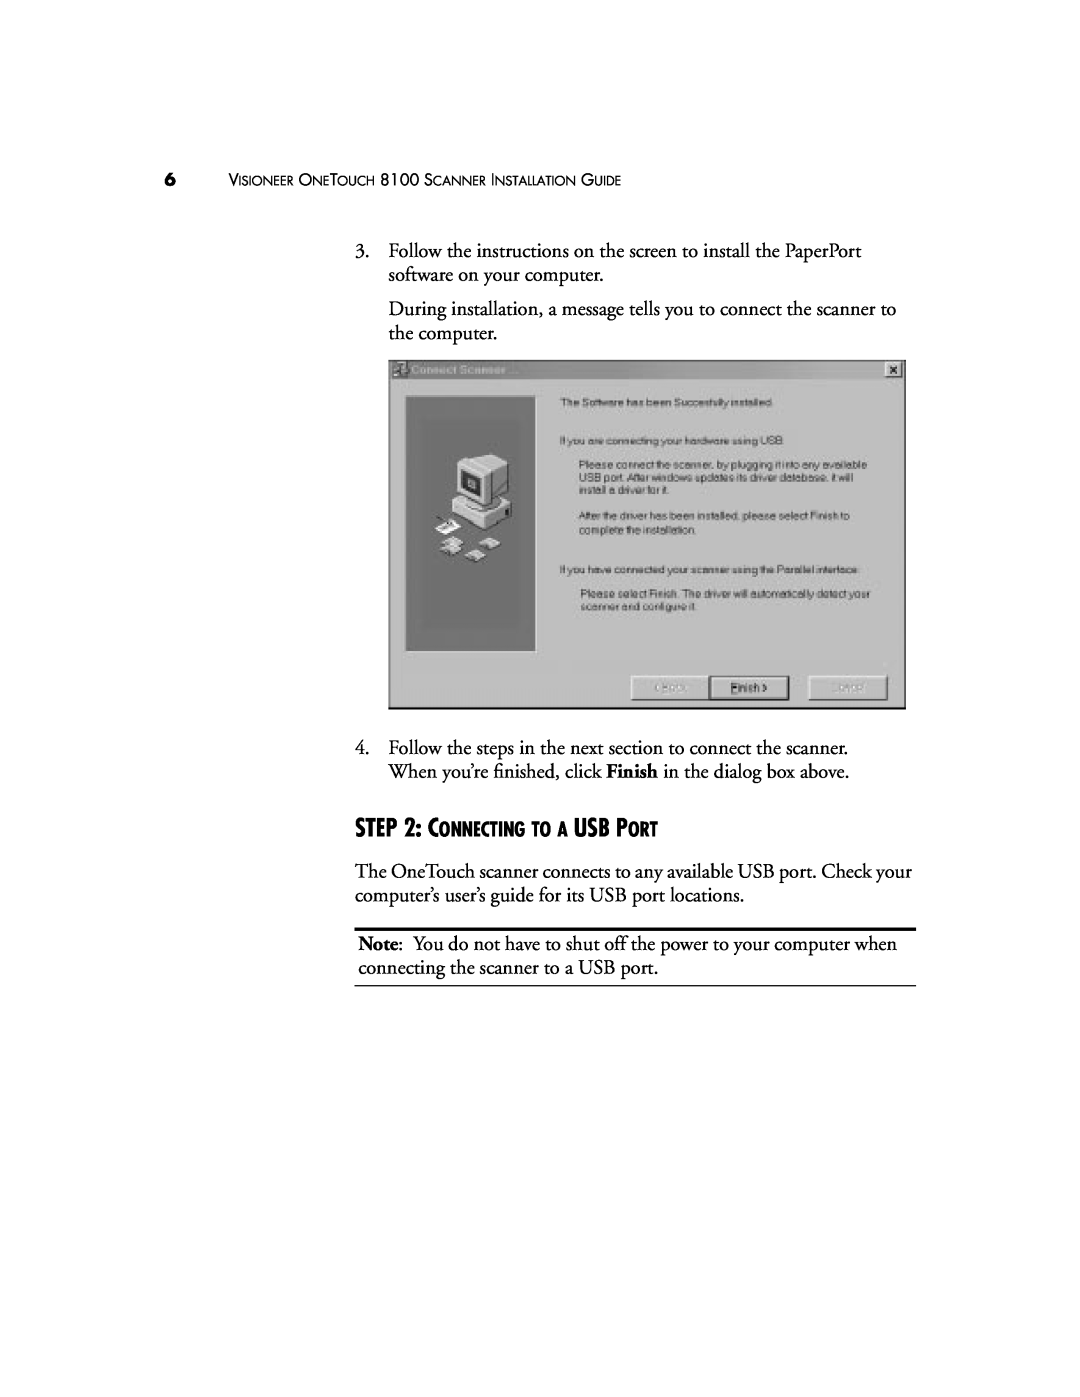 Visioneer manual Connecting To A Usb Port, VISIONEER ONETOUCH 8100 SCANNER INSTALLATION GUIDE 